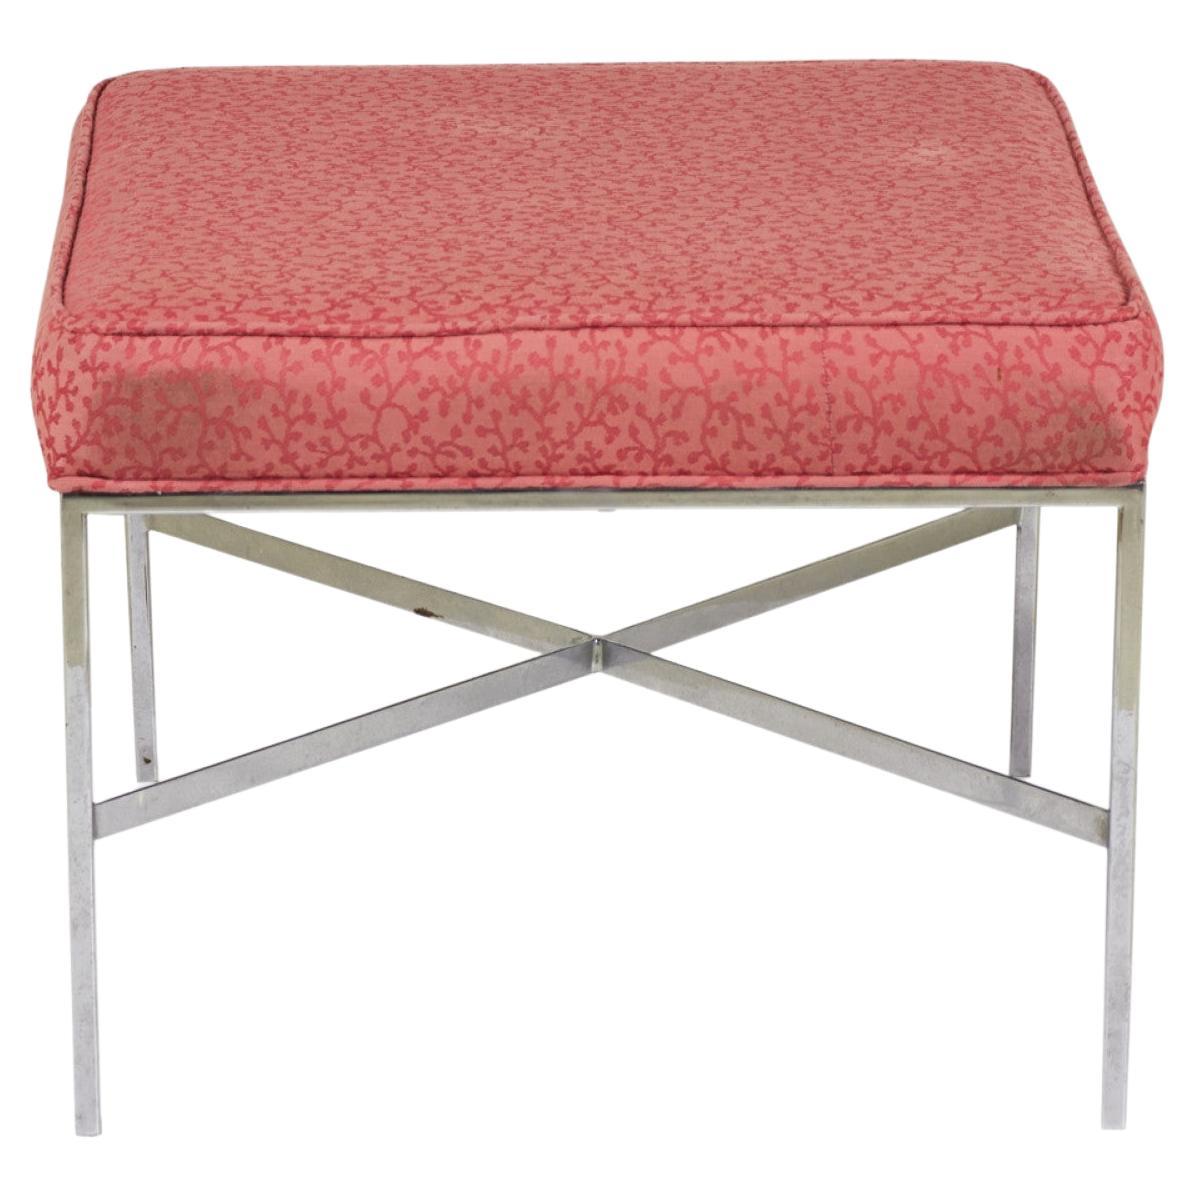 Design Institute of Chrome and Raspberry Upholstery Square Bench